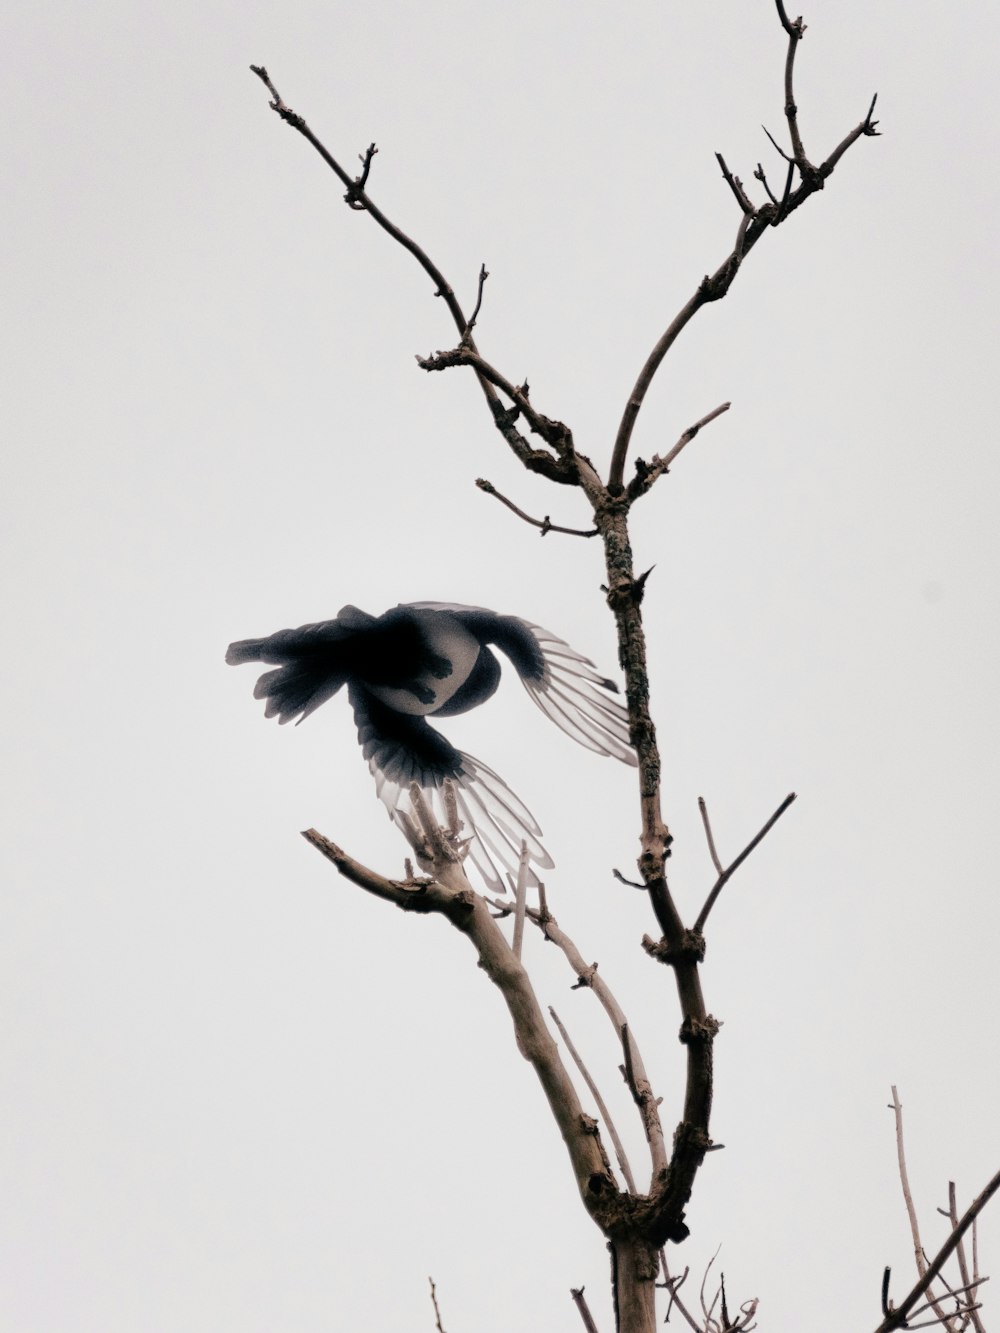 a bird is perched on top of a bare tree